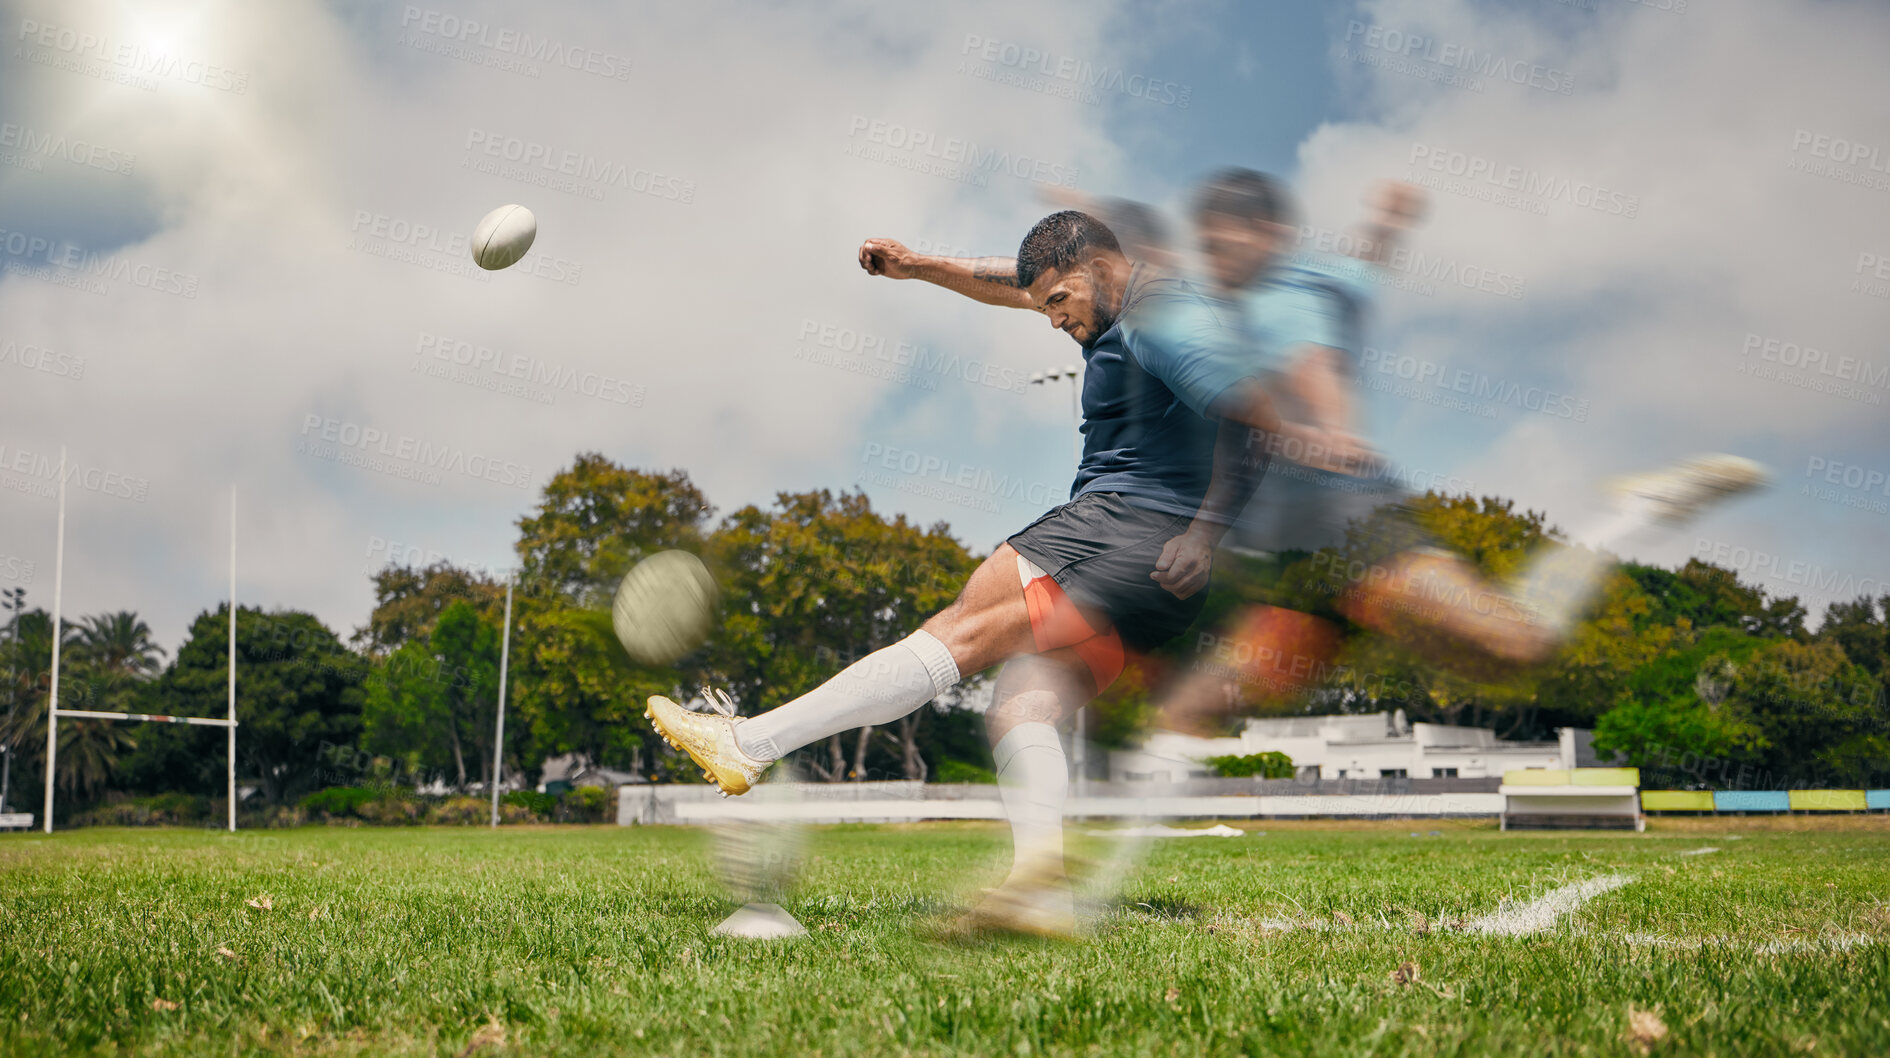 Buy stock photo Rugby, blur and man kicking ball to score goal on field at game, match or practice workout. Sports, fitness and motion, player running to kick at poles on grass with energy and skill in team sport.